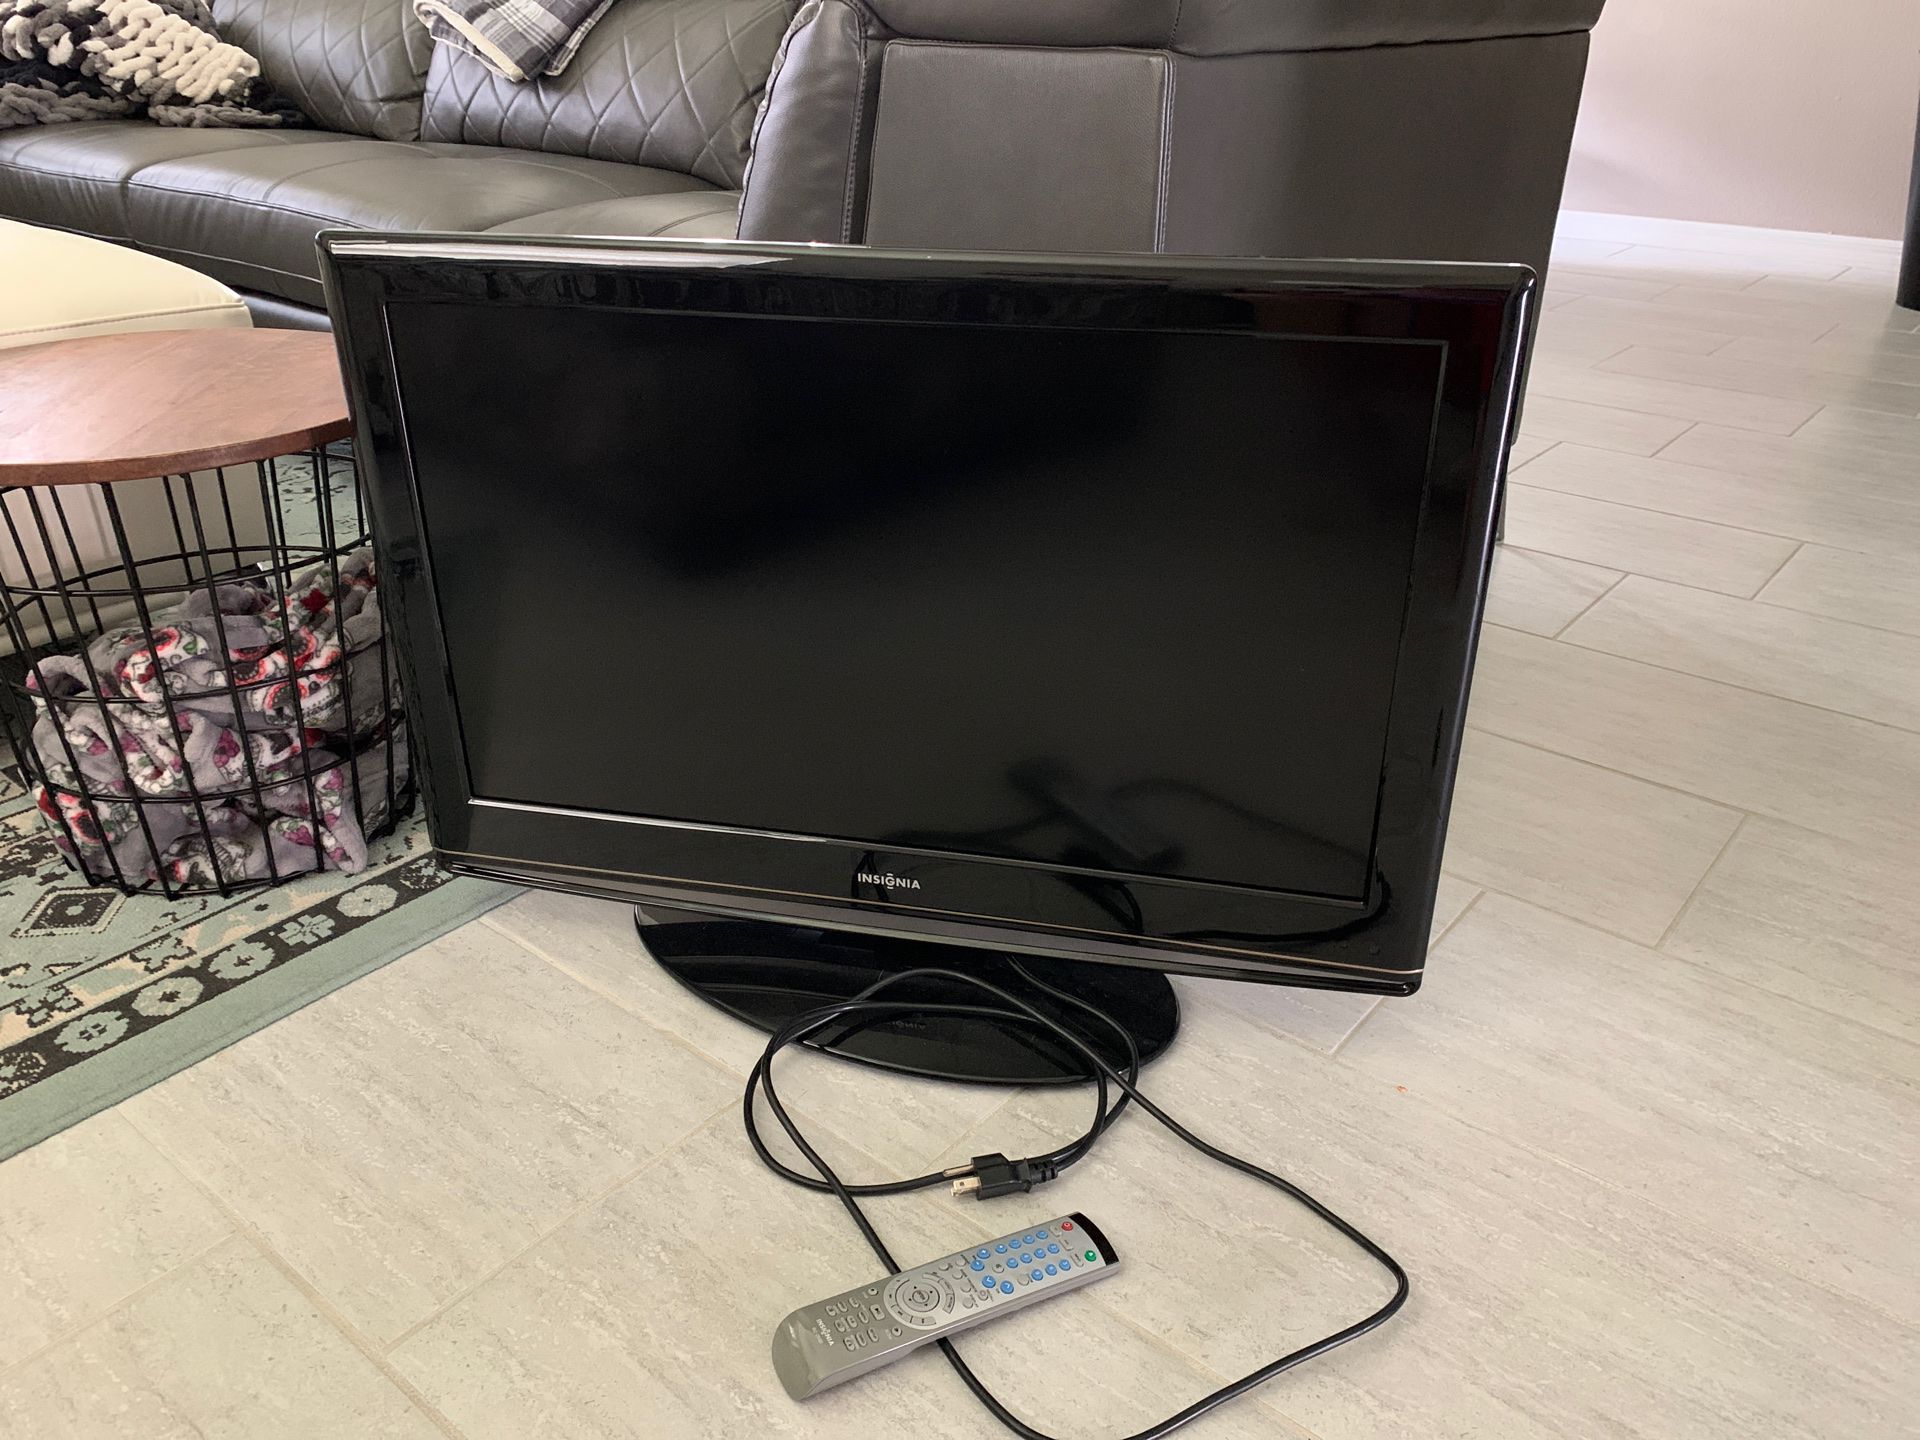 32 inch insignia TV with built in DVD player